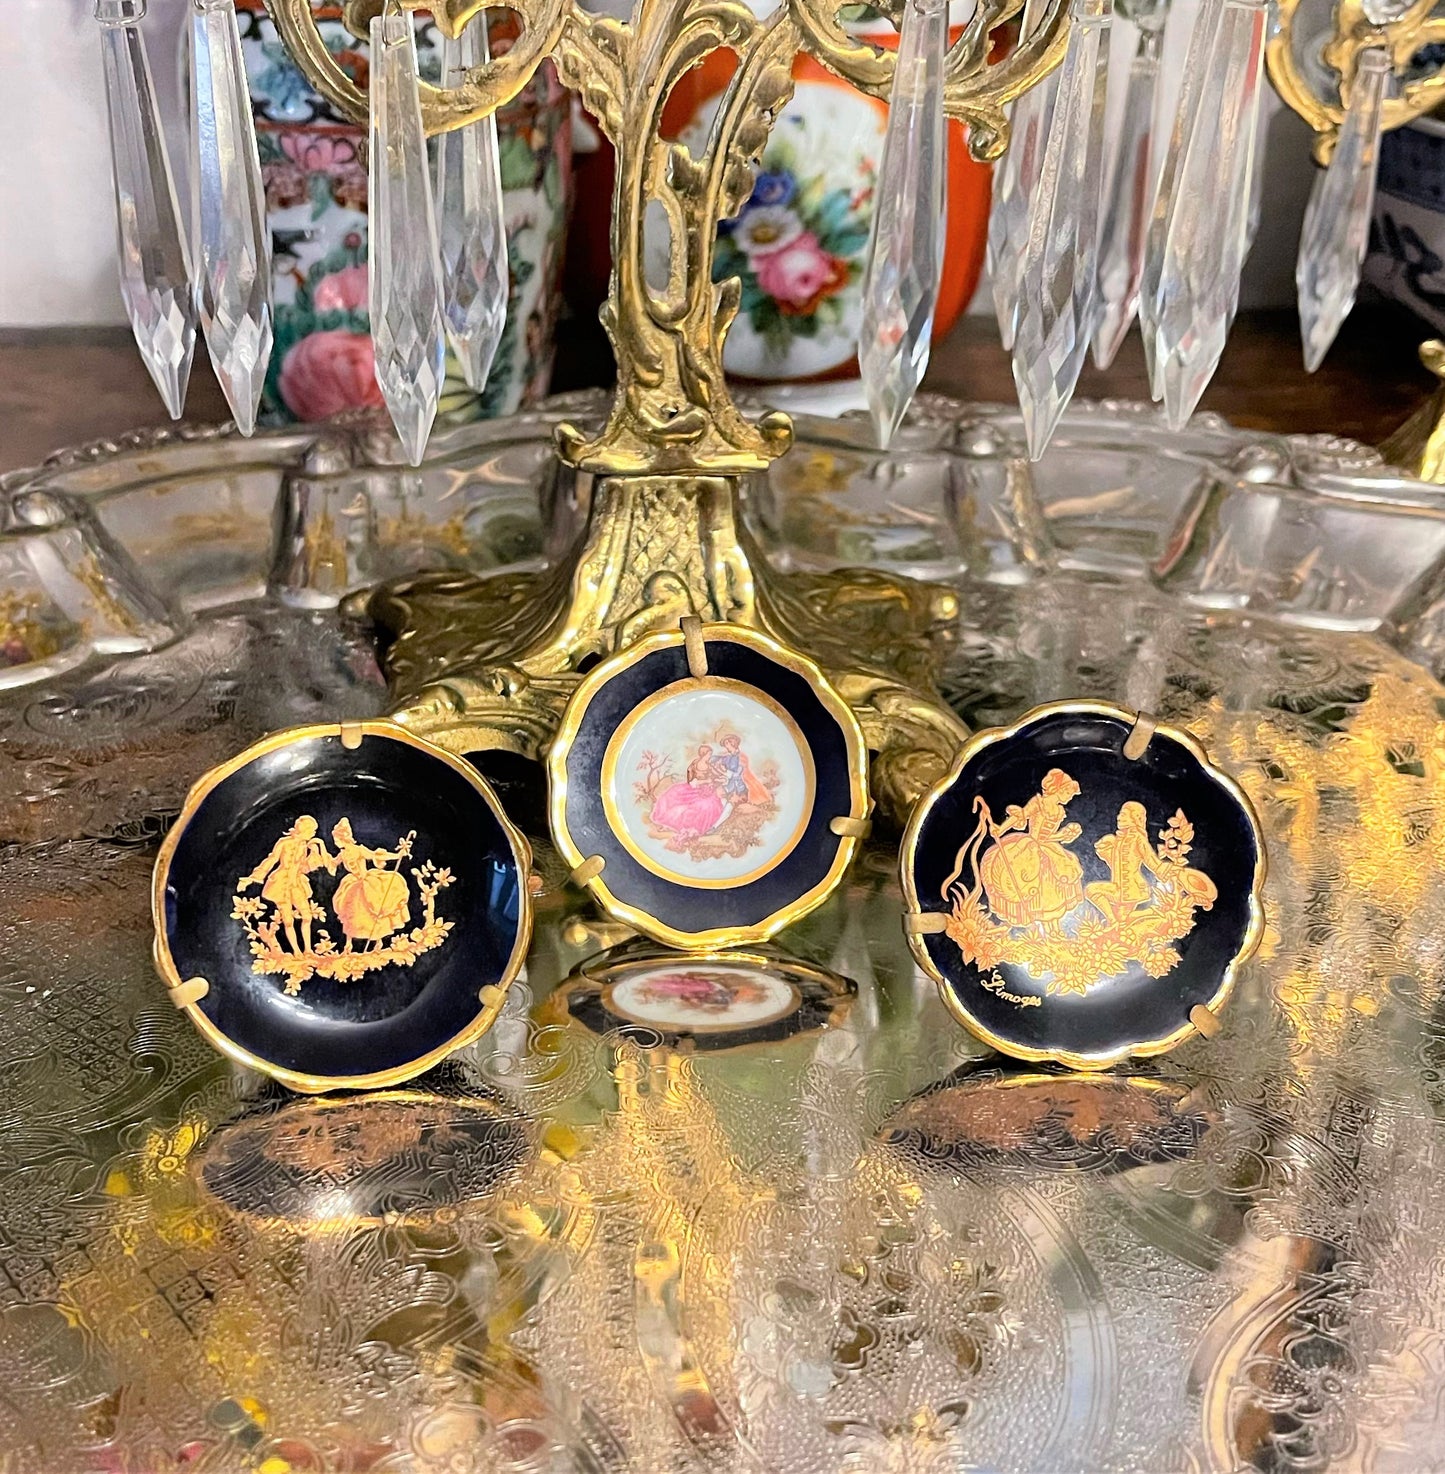 Limoges Miniature Plates in Brass Stands, Set of Three, Made in France, Hand Painted Porcelain